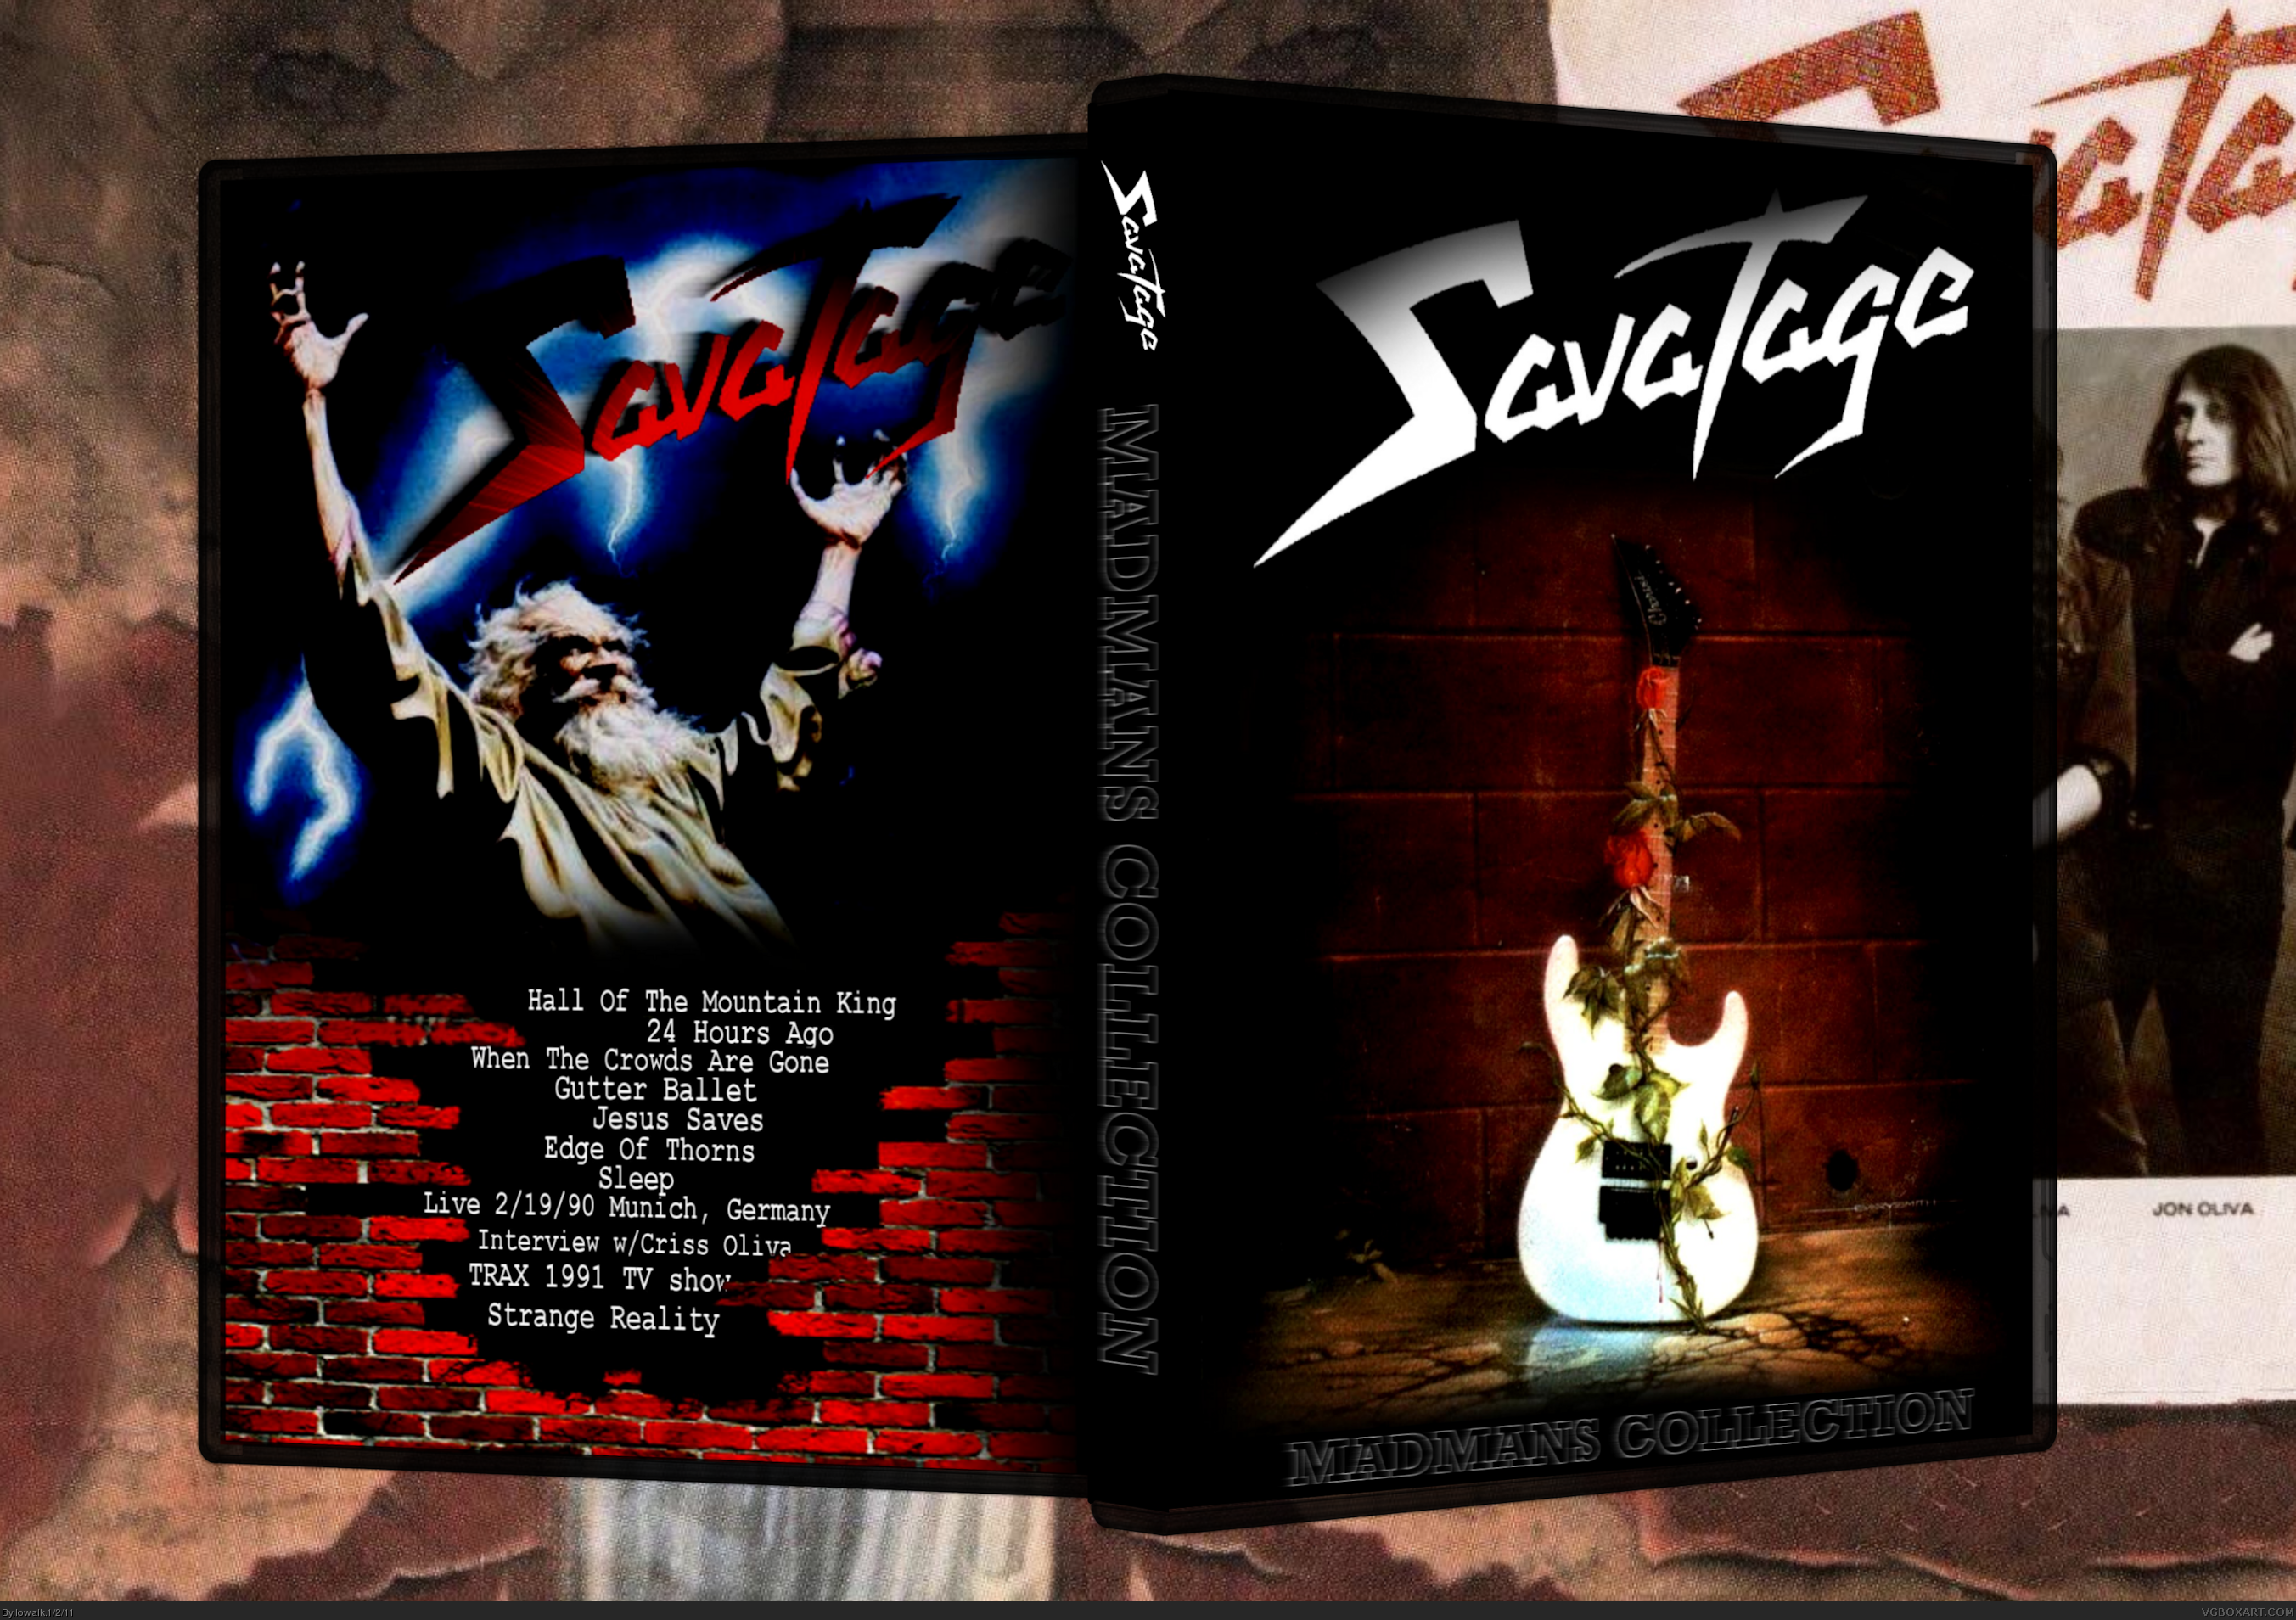 Savatage - Madmans Collection box cover